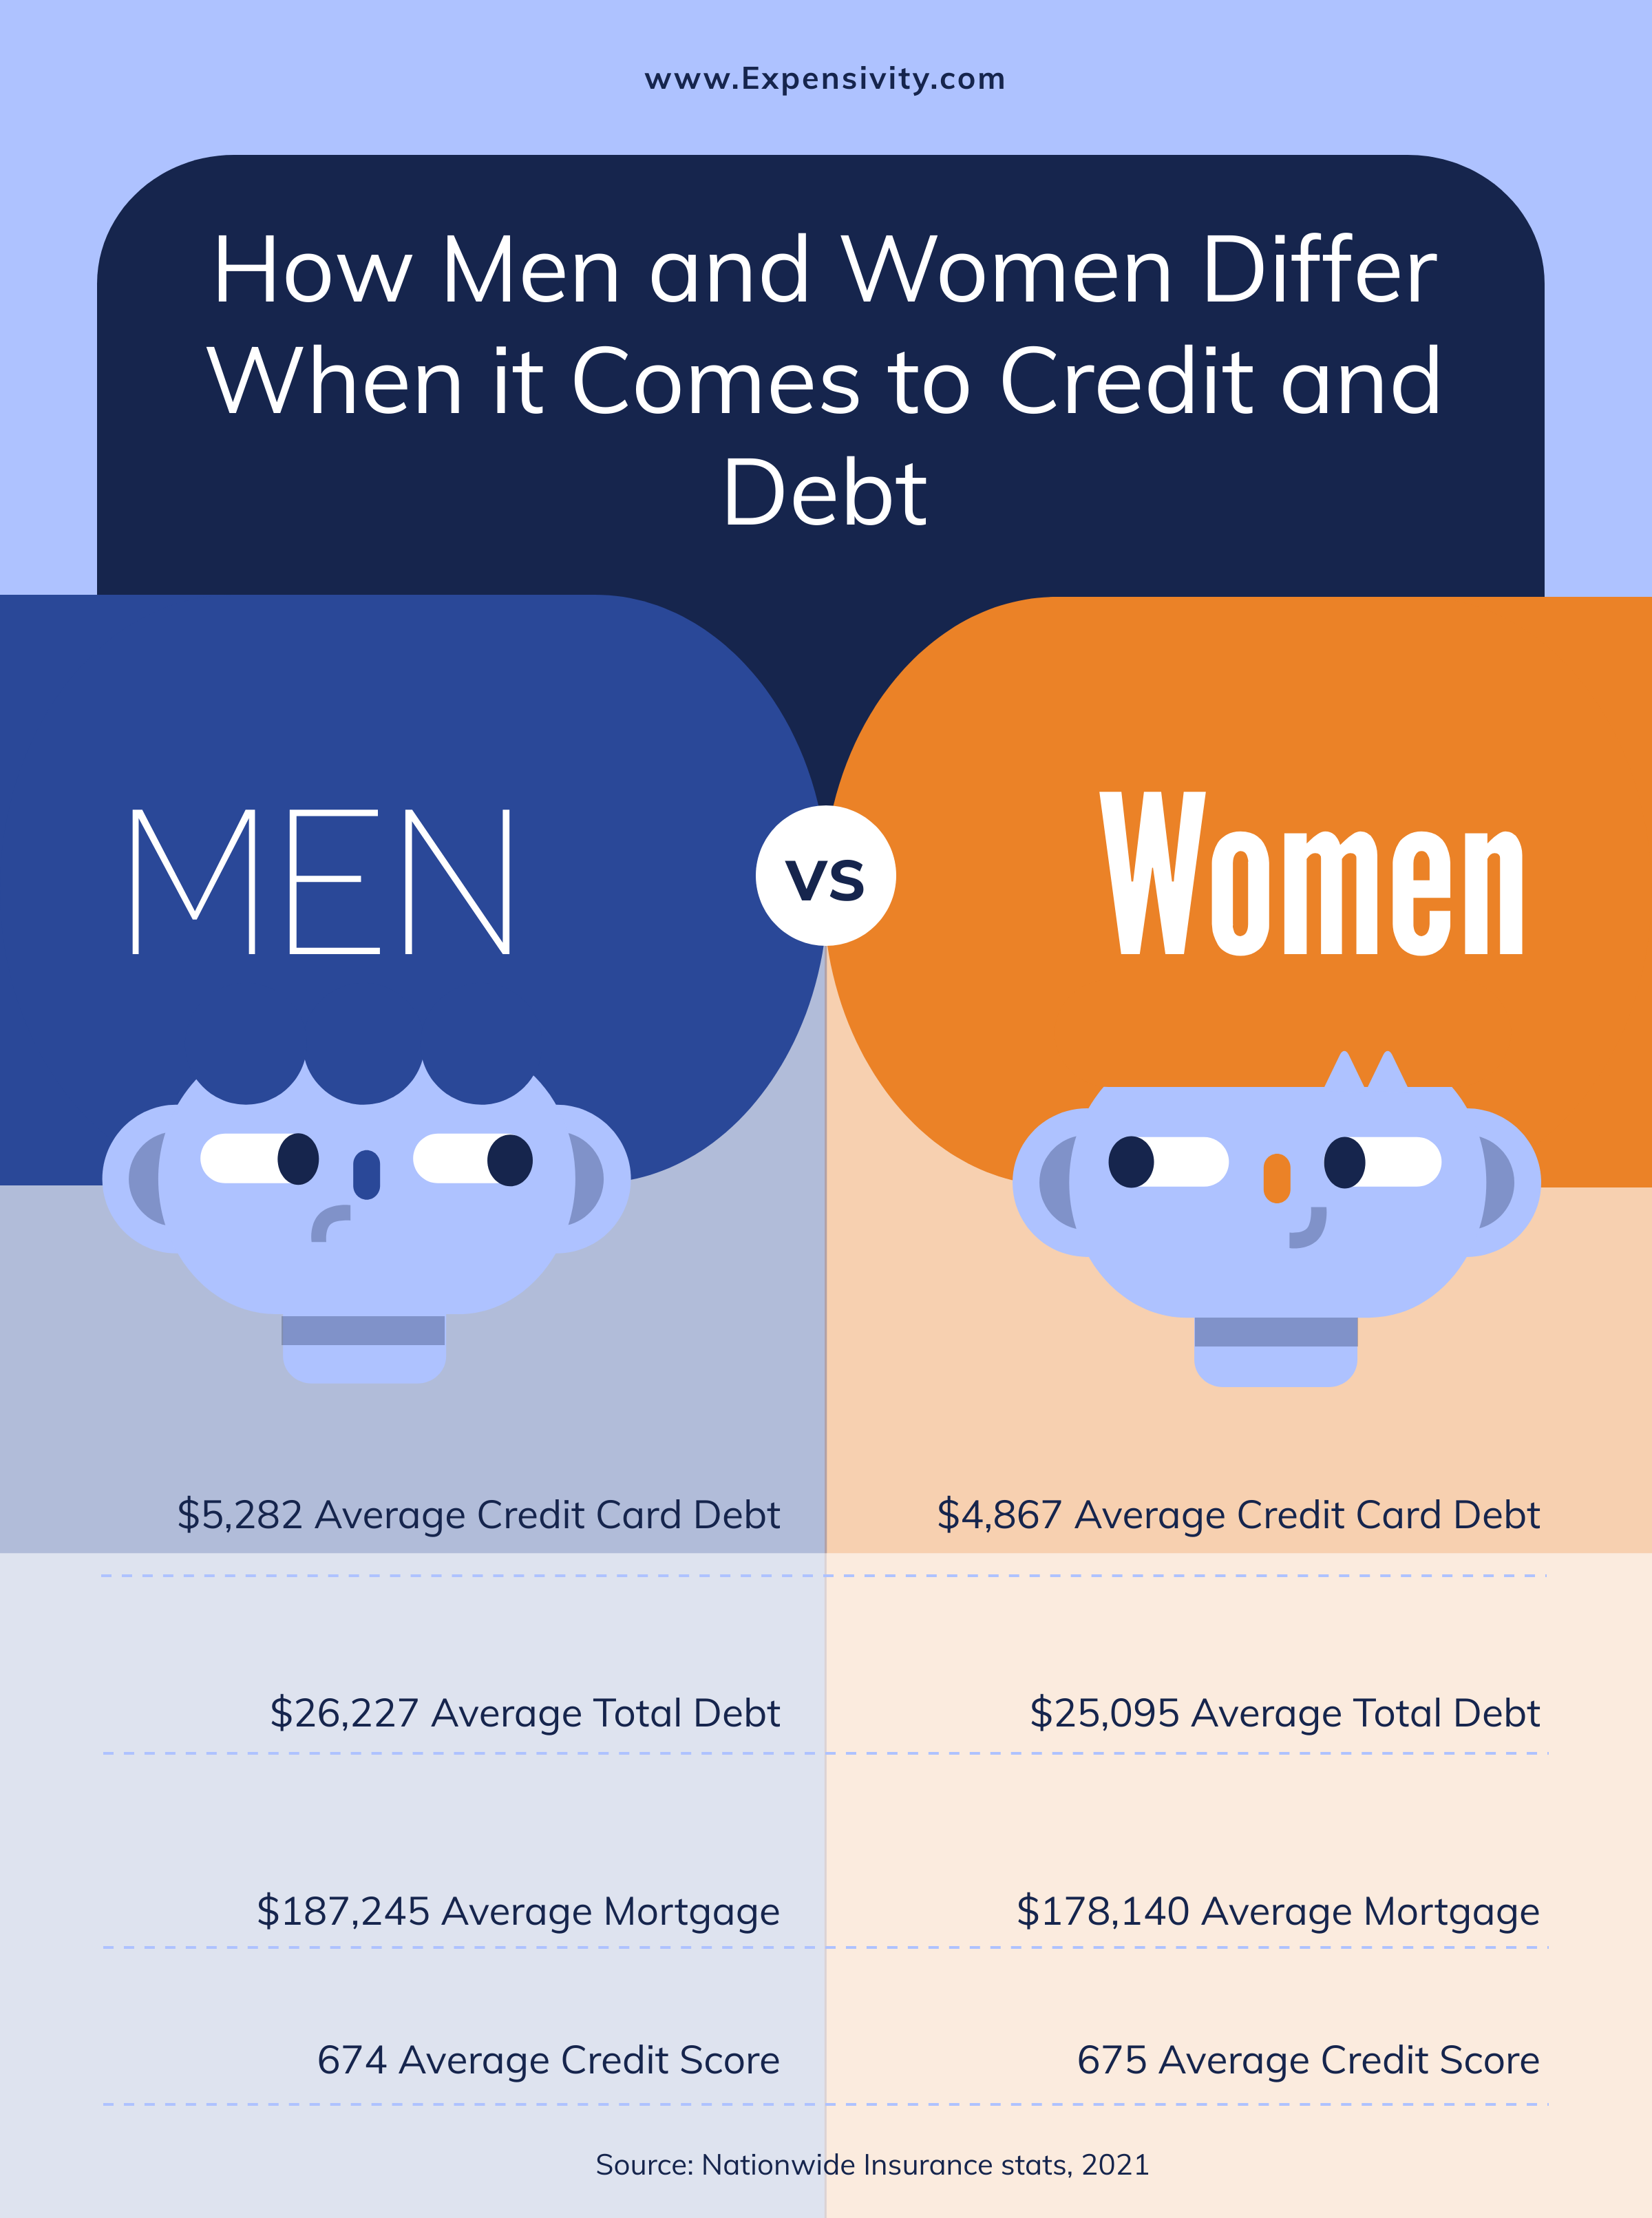 Graphic image comparing how men and women differ when it comes to credit debt